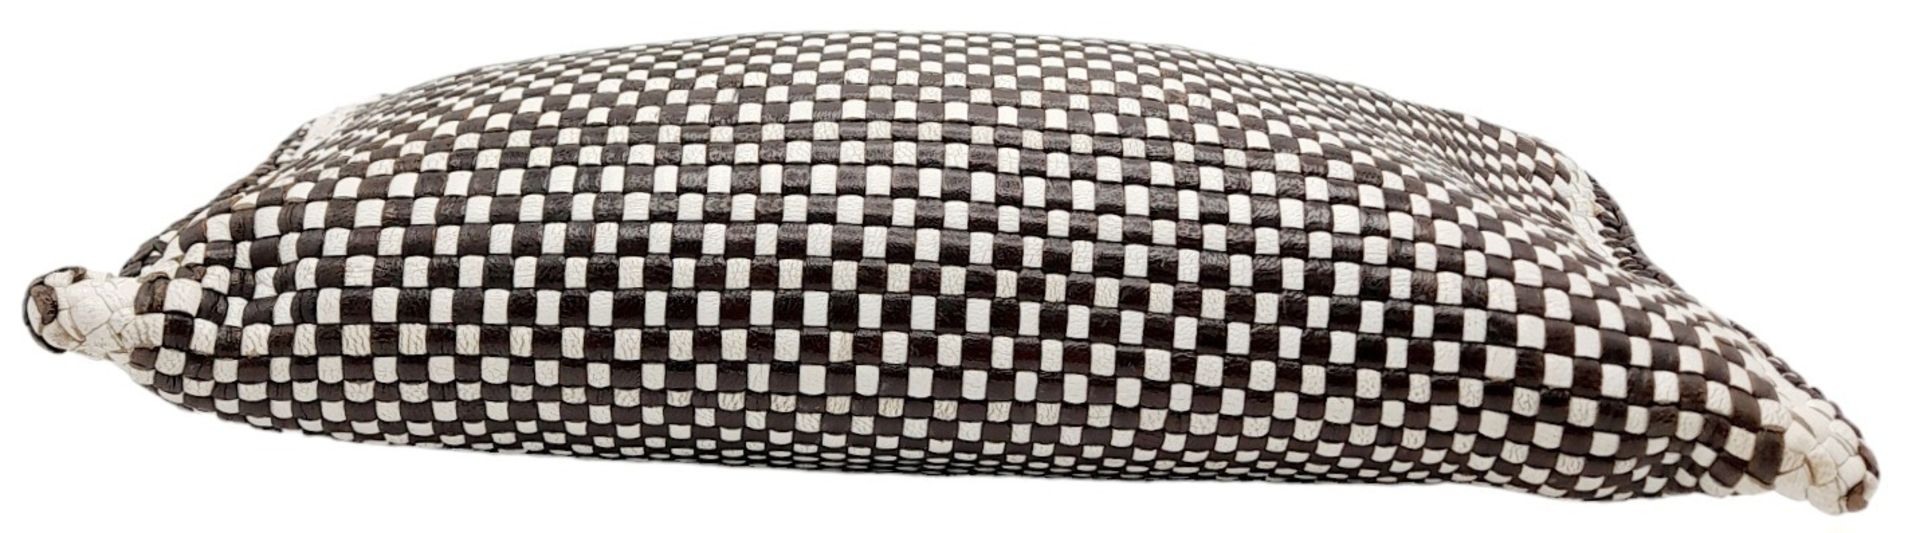 A Prada Black and White 'Madras' Clutch Bag. Woven leather exterior with gold-toned hardware and - Bild 4 aus 9